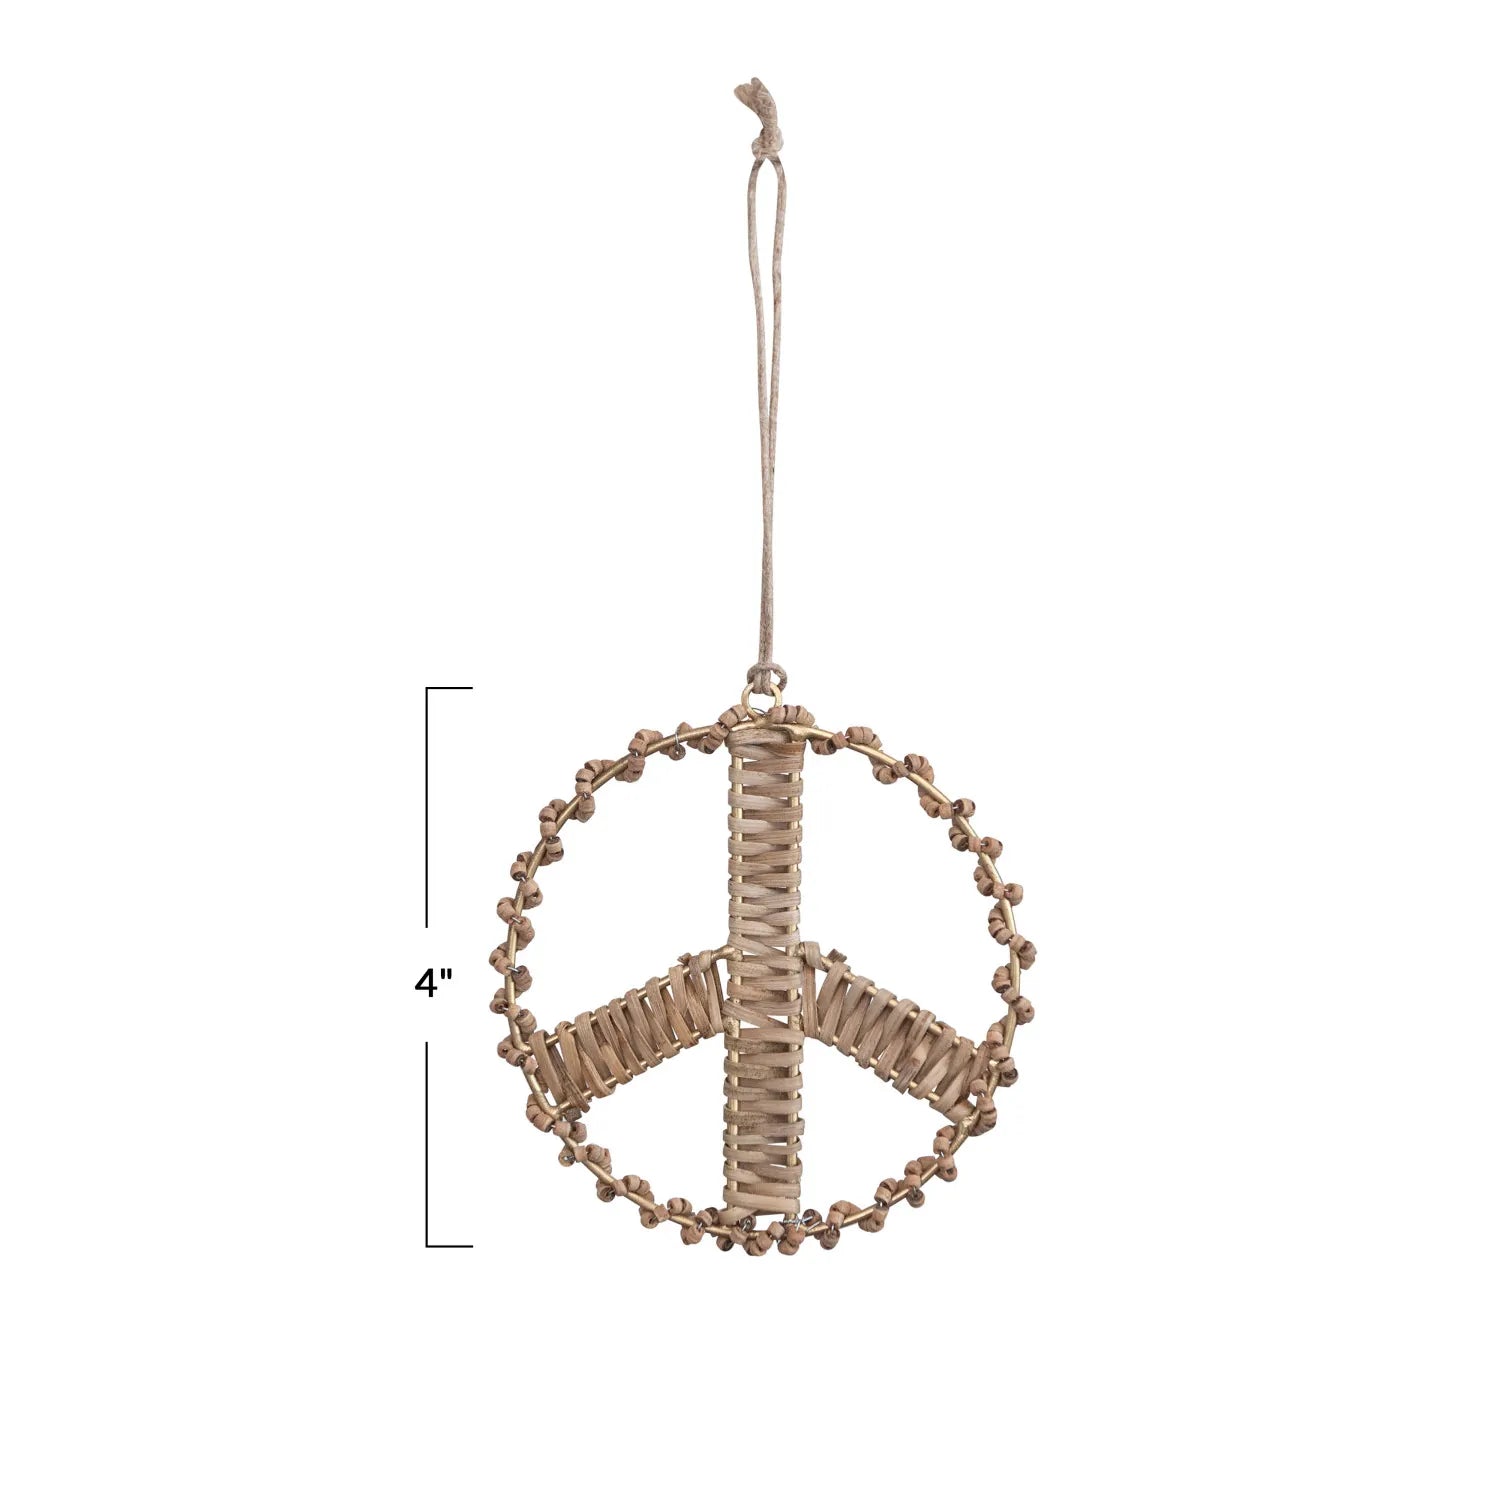 Peace sign ornament made of mango wood and rattan measures 4" high. 